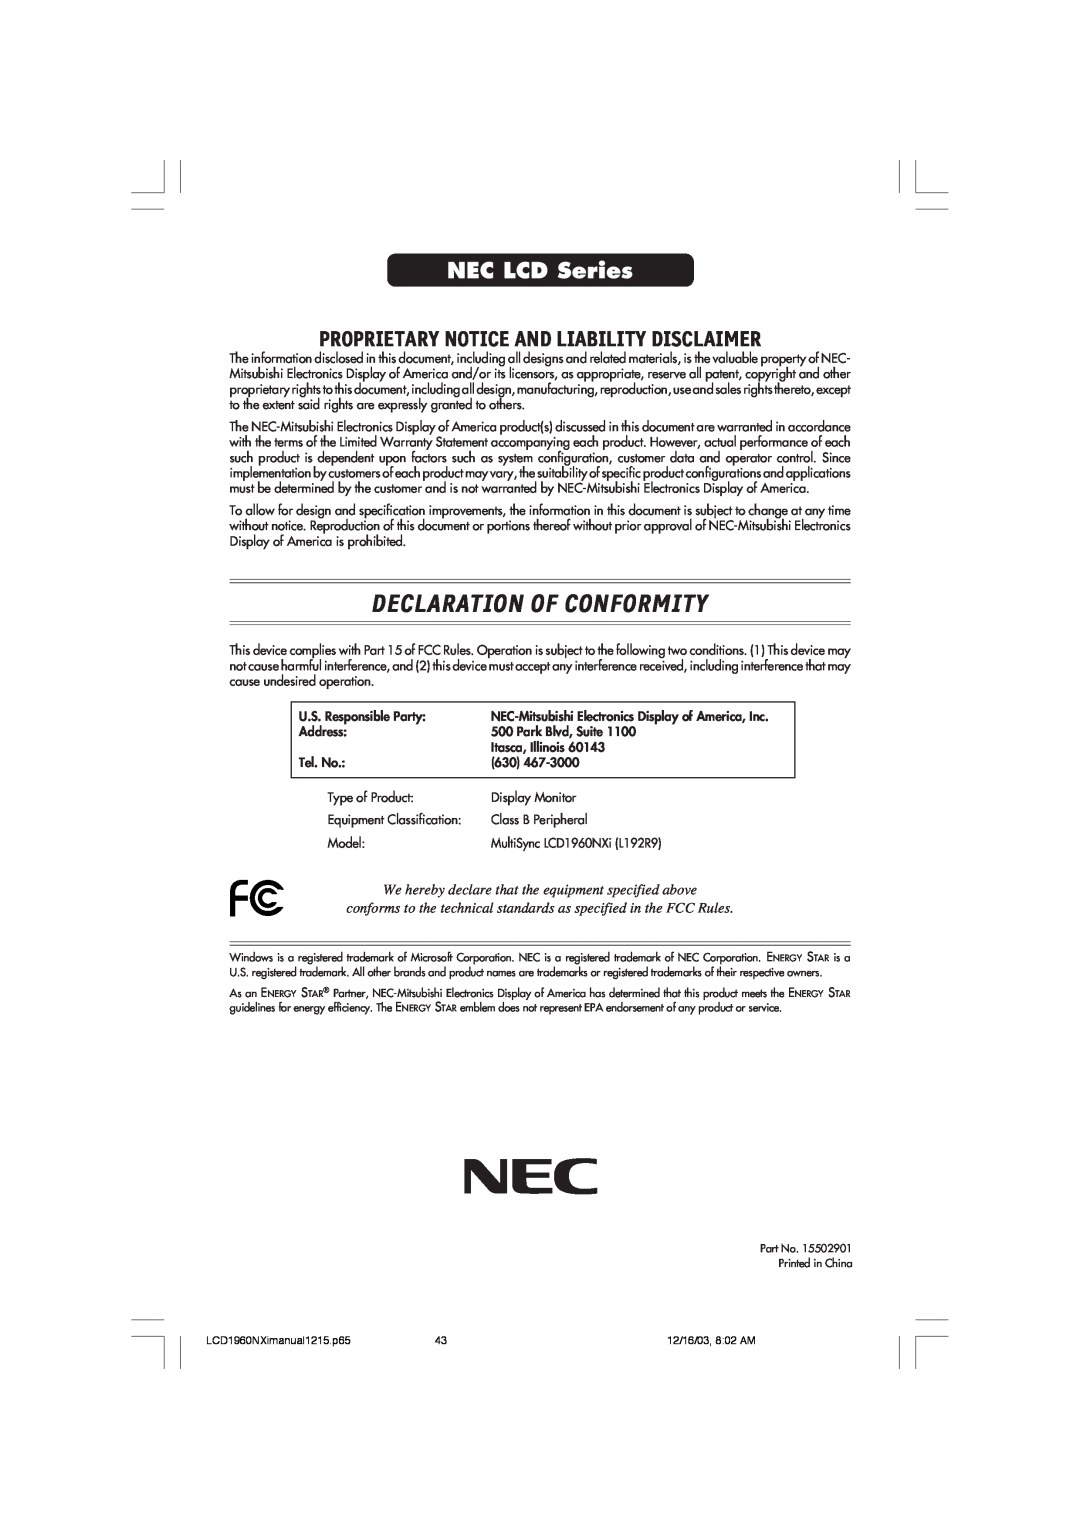 NEC LCD1960NXI manual Declaration Of Conformity, NEC LCD Series, Proprietary Notice And Liability Disclaimer 